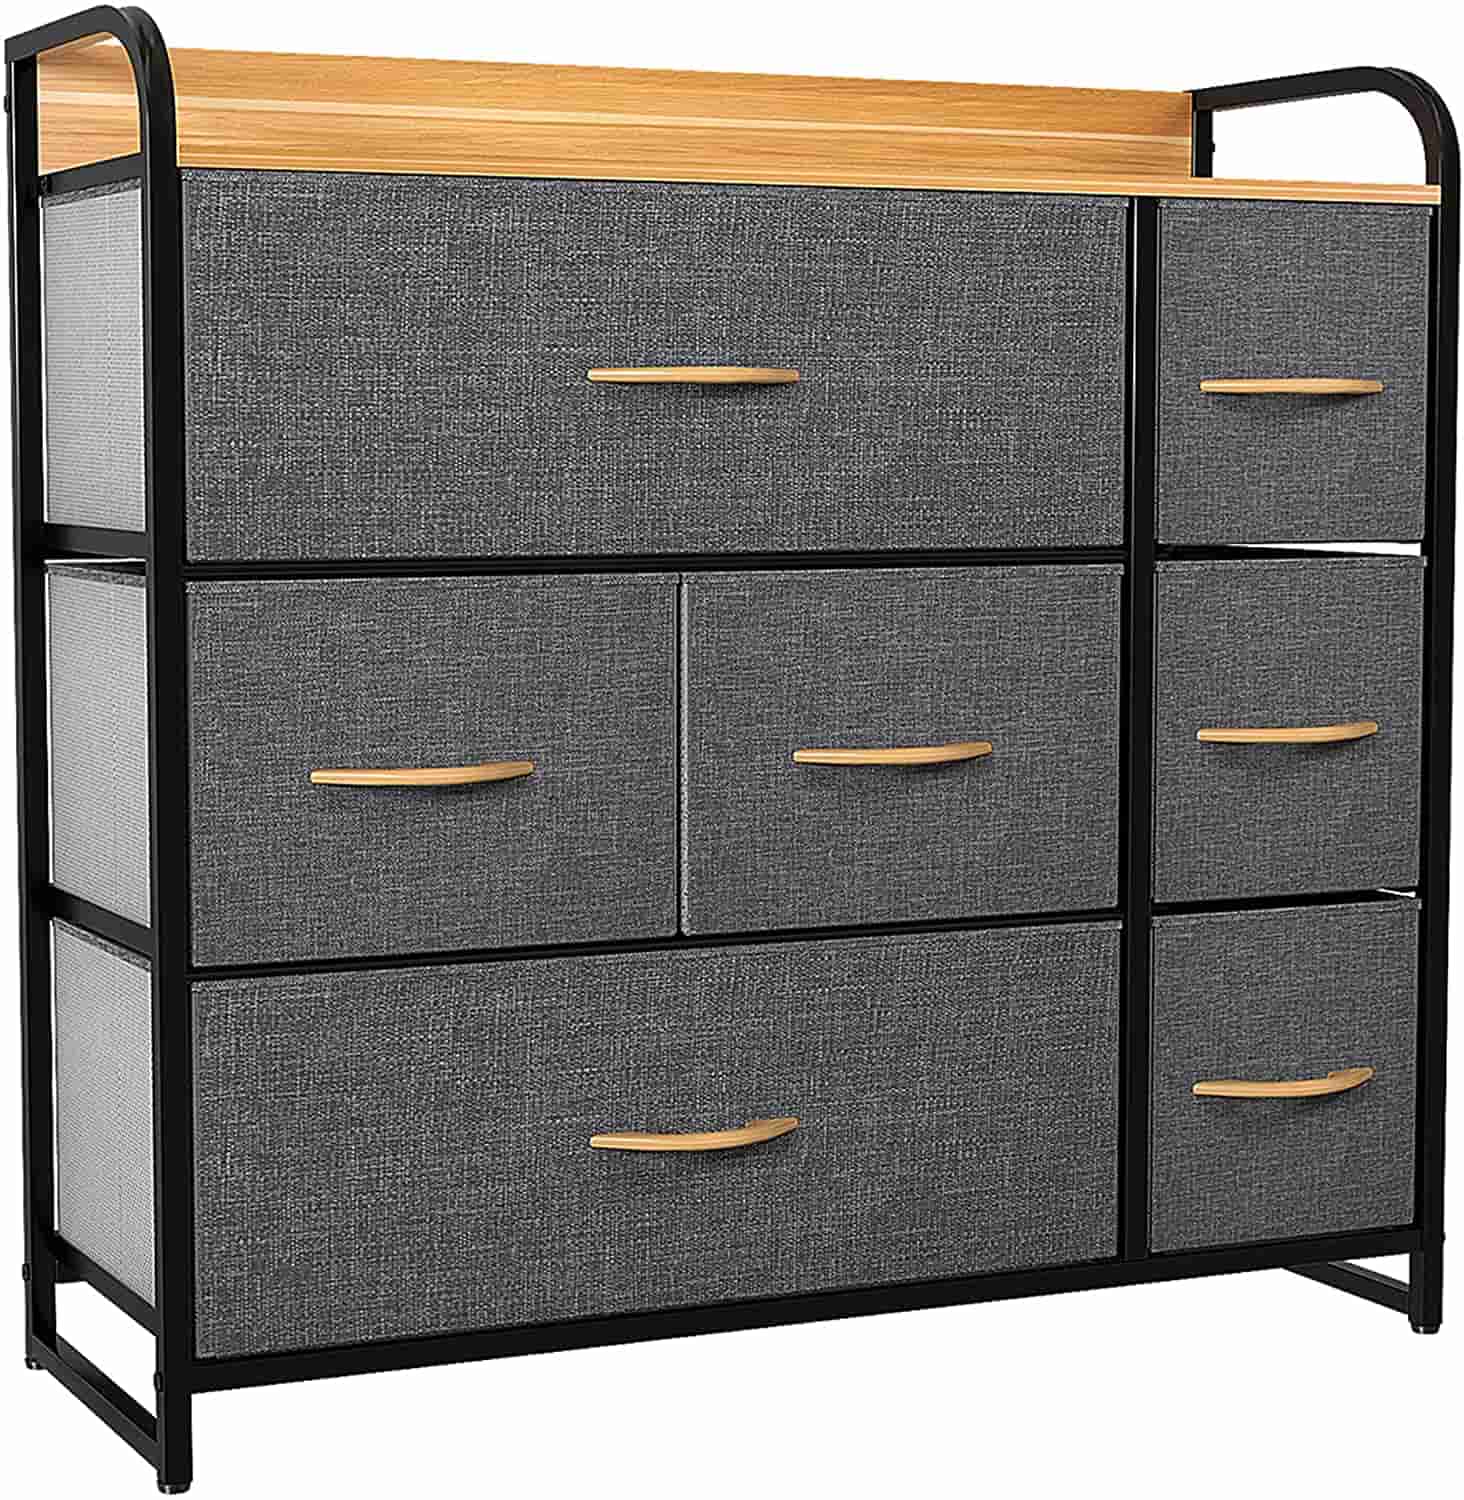 Modern YITAHOME Dresser with 7 Drawers – Fabric Storage Tower